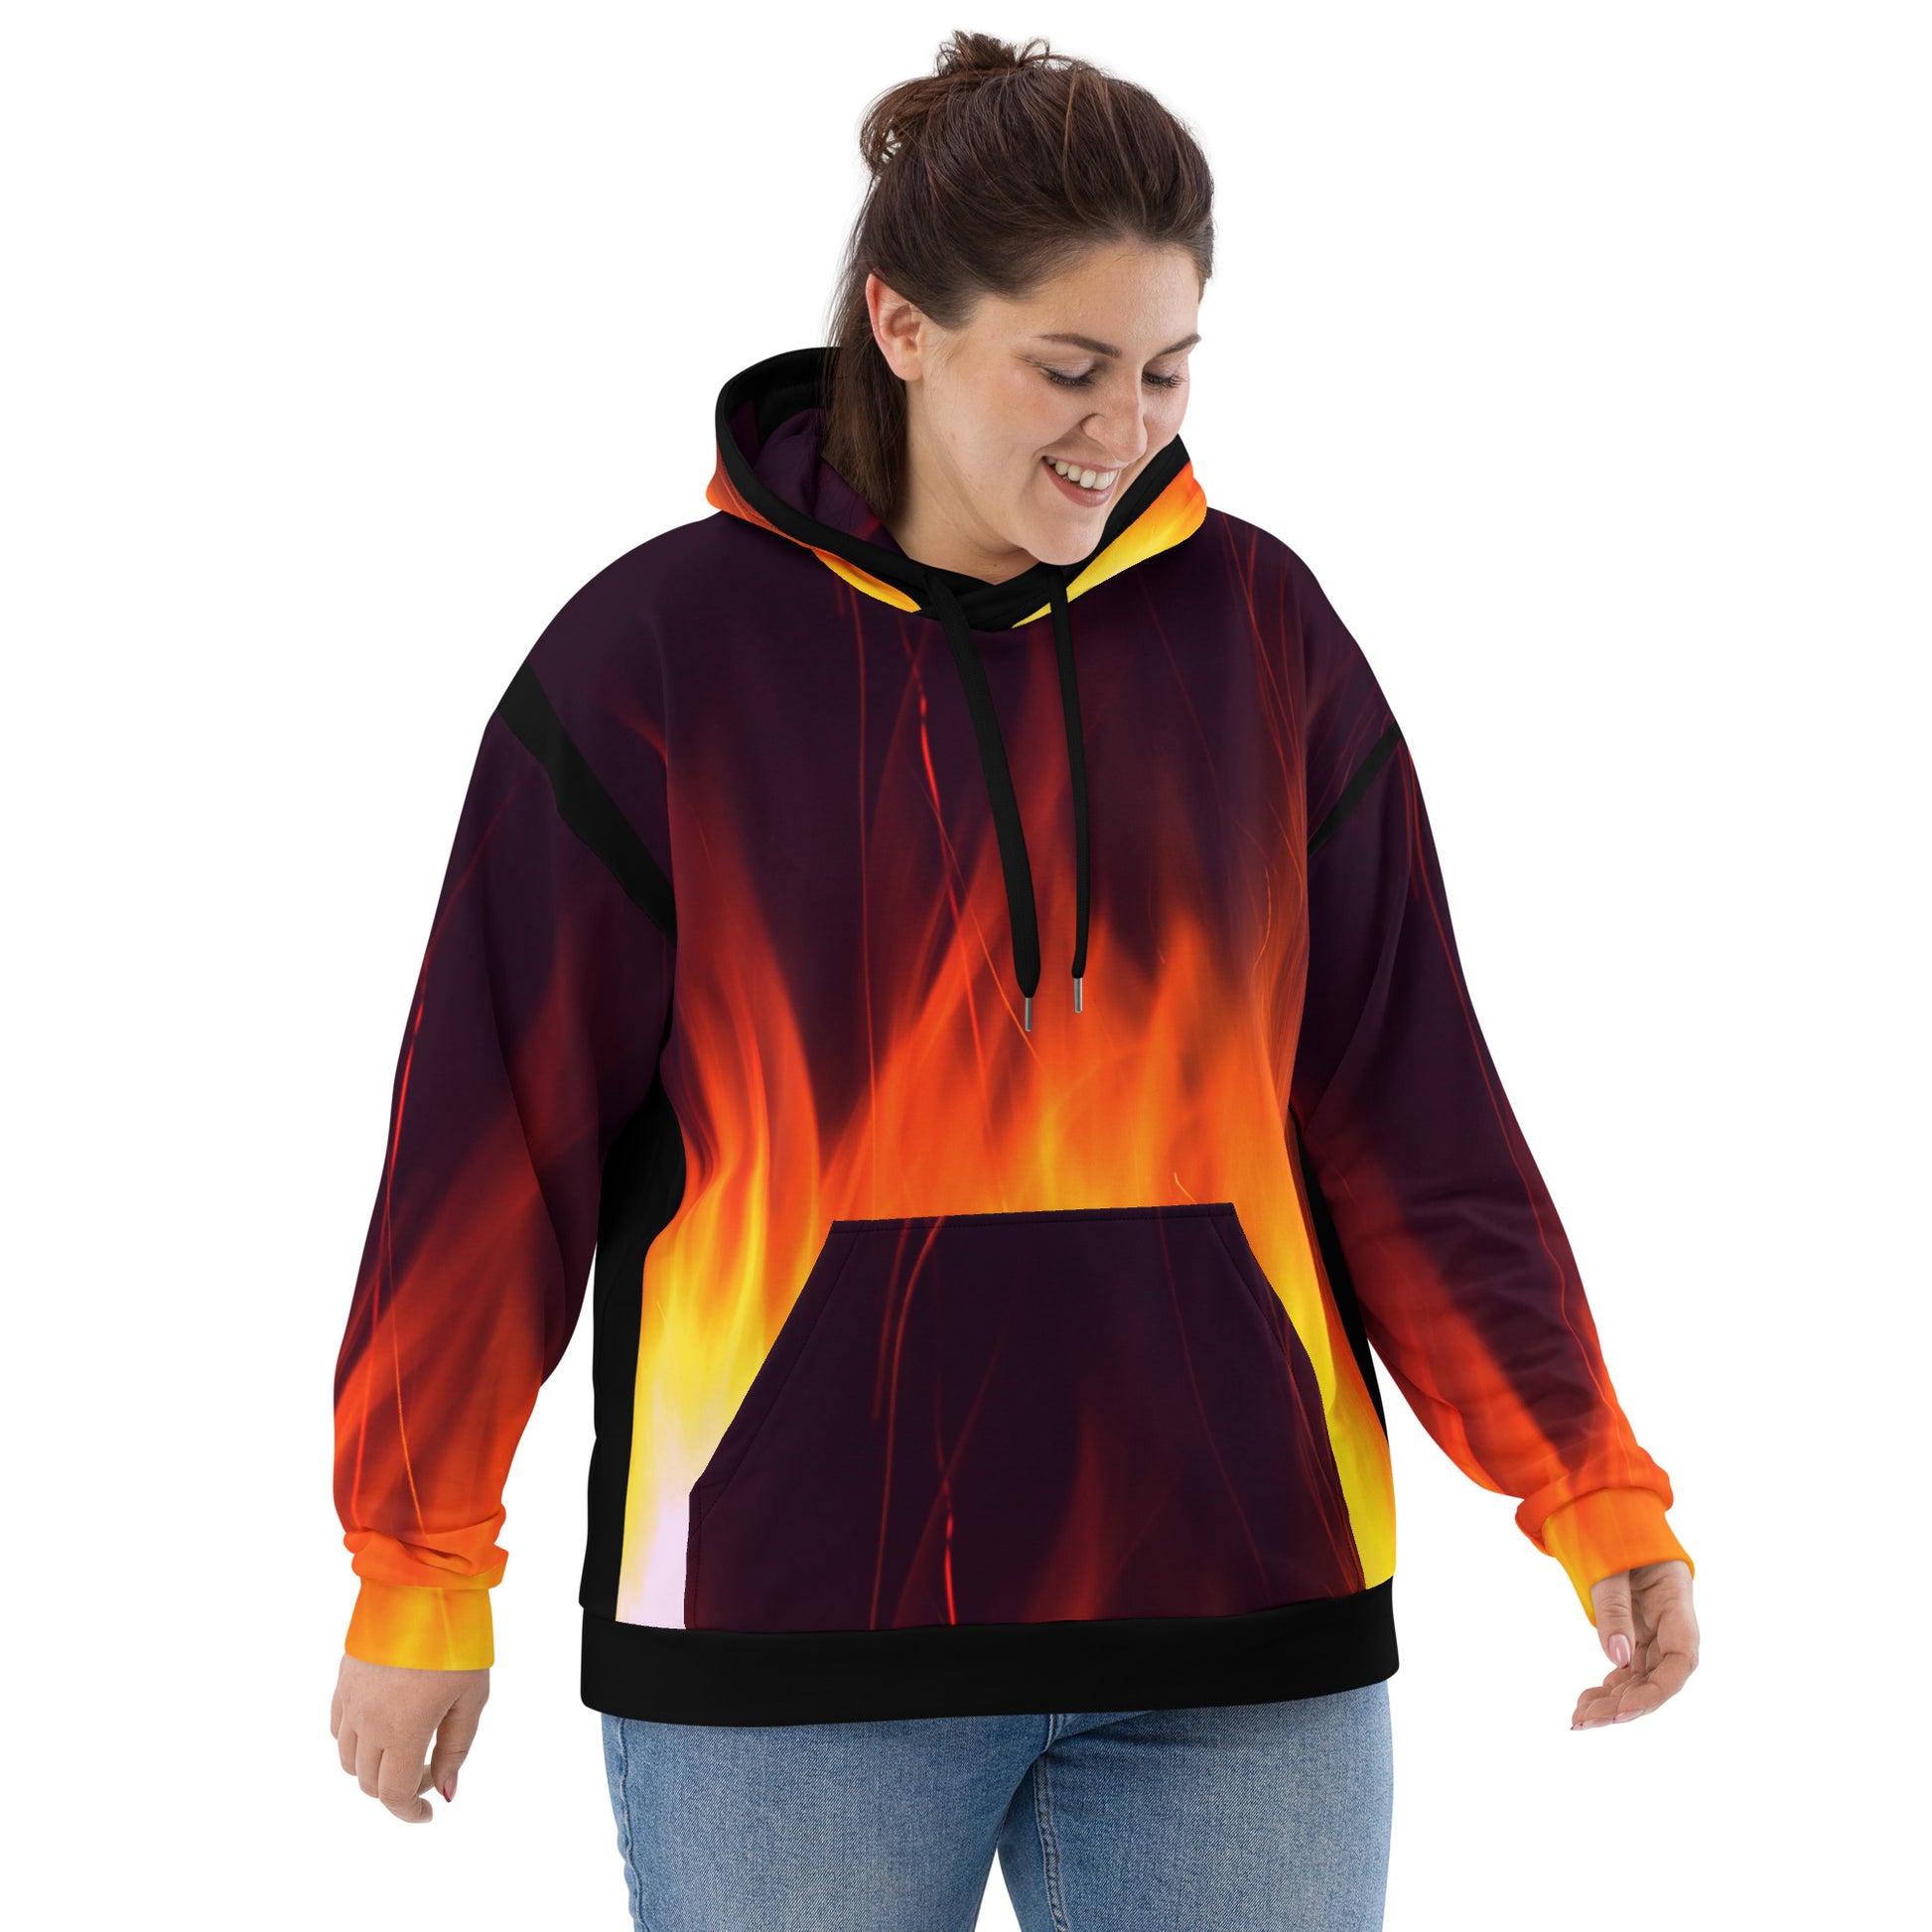 SpotlYght Seeker Artist on Fire Merch - A bold and empowering 46 Fan collection piece to ignite your journey and rise like a Phoenix. 🌟 Plus size